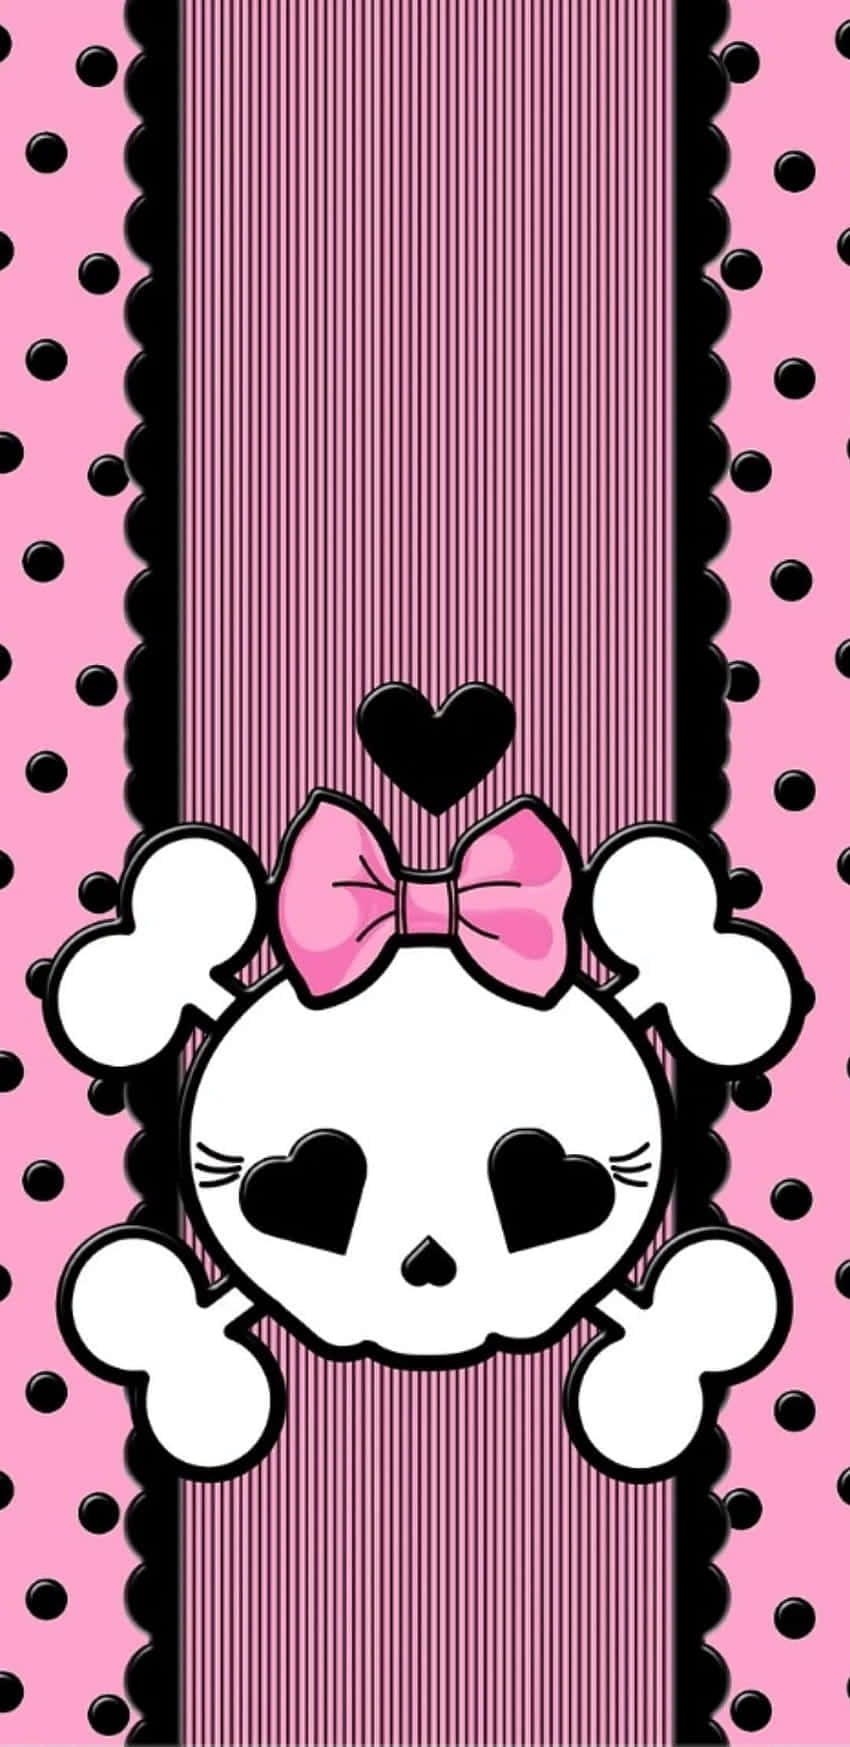 Show off your inner-emo with this adorable wallpaper for your iPhone! Wallpaper